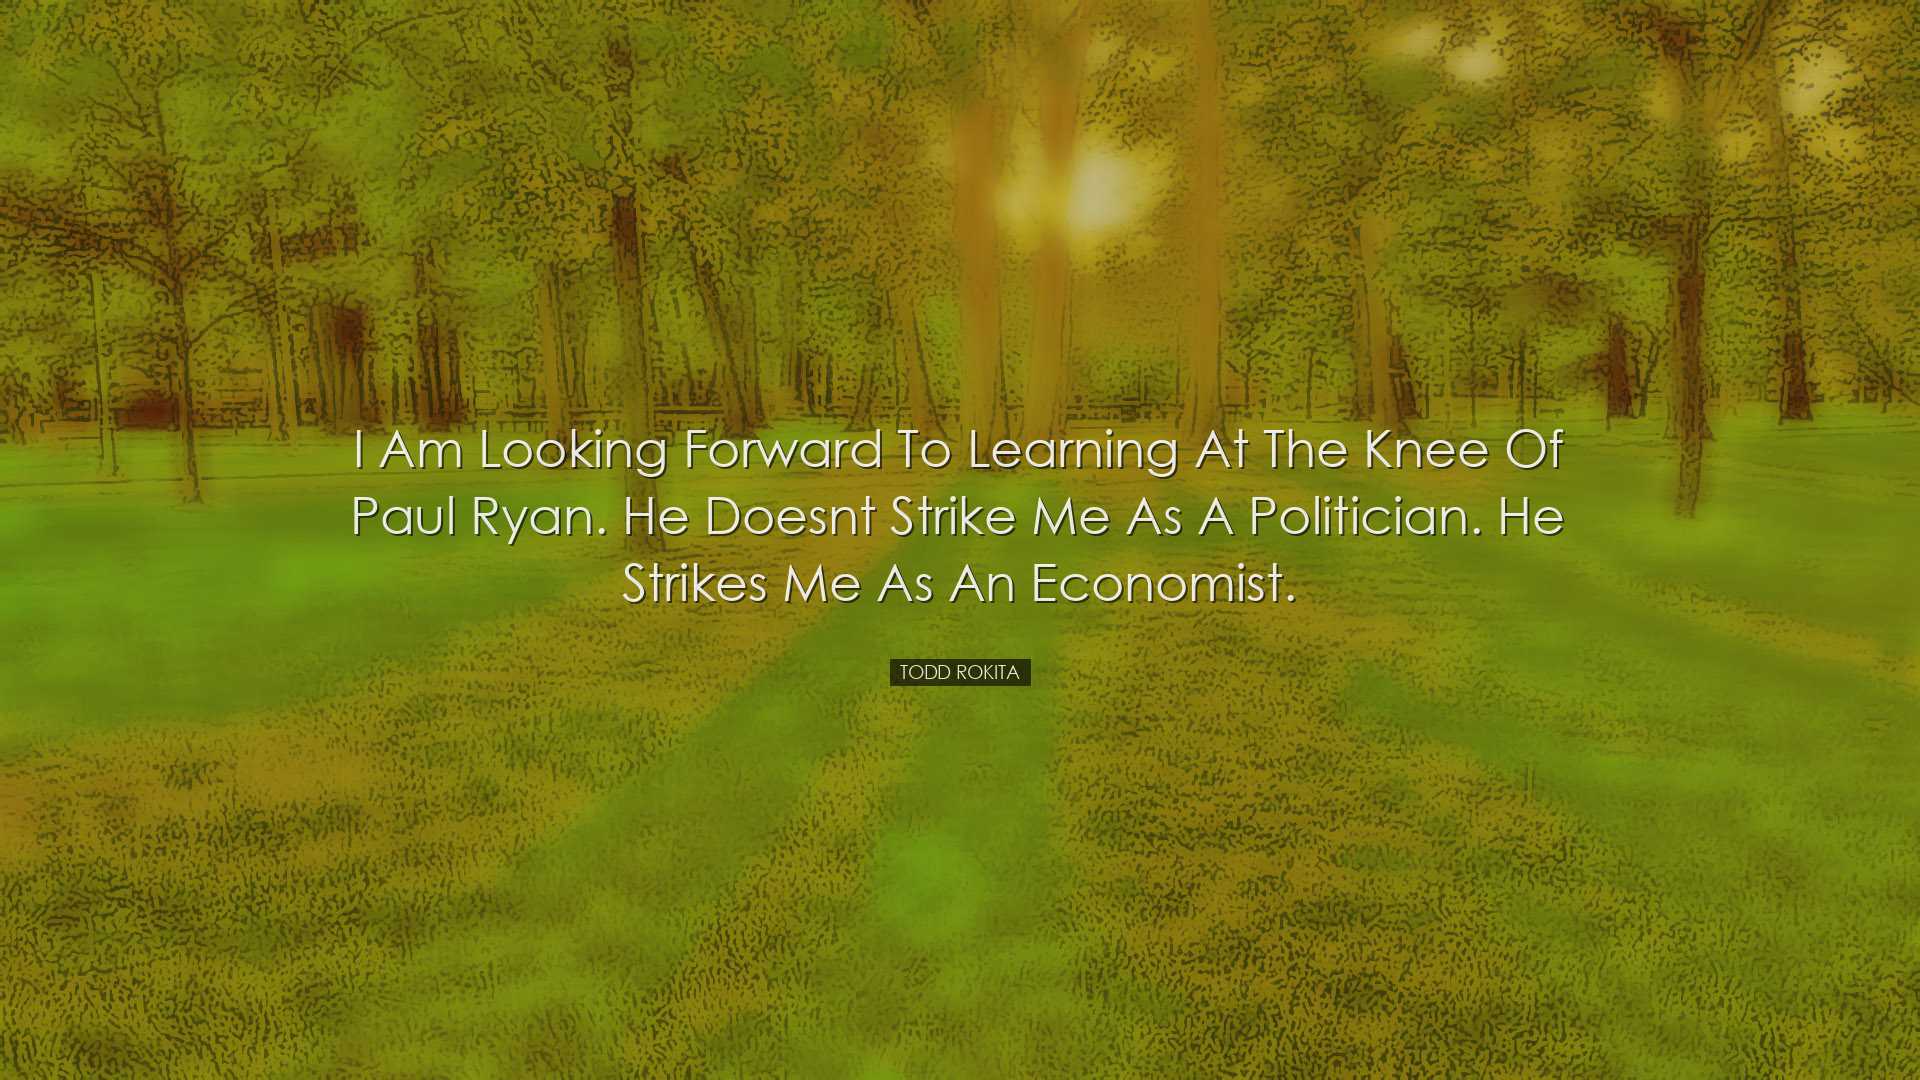 I am looking forward to learning at the knee of Paul Ryan. He does